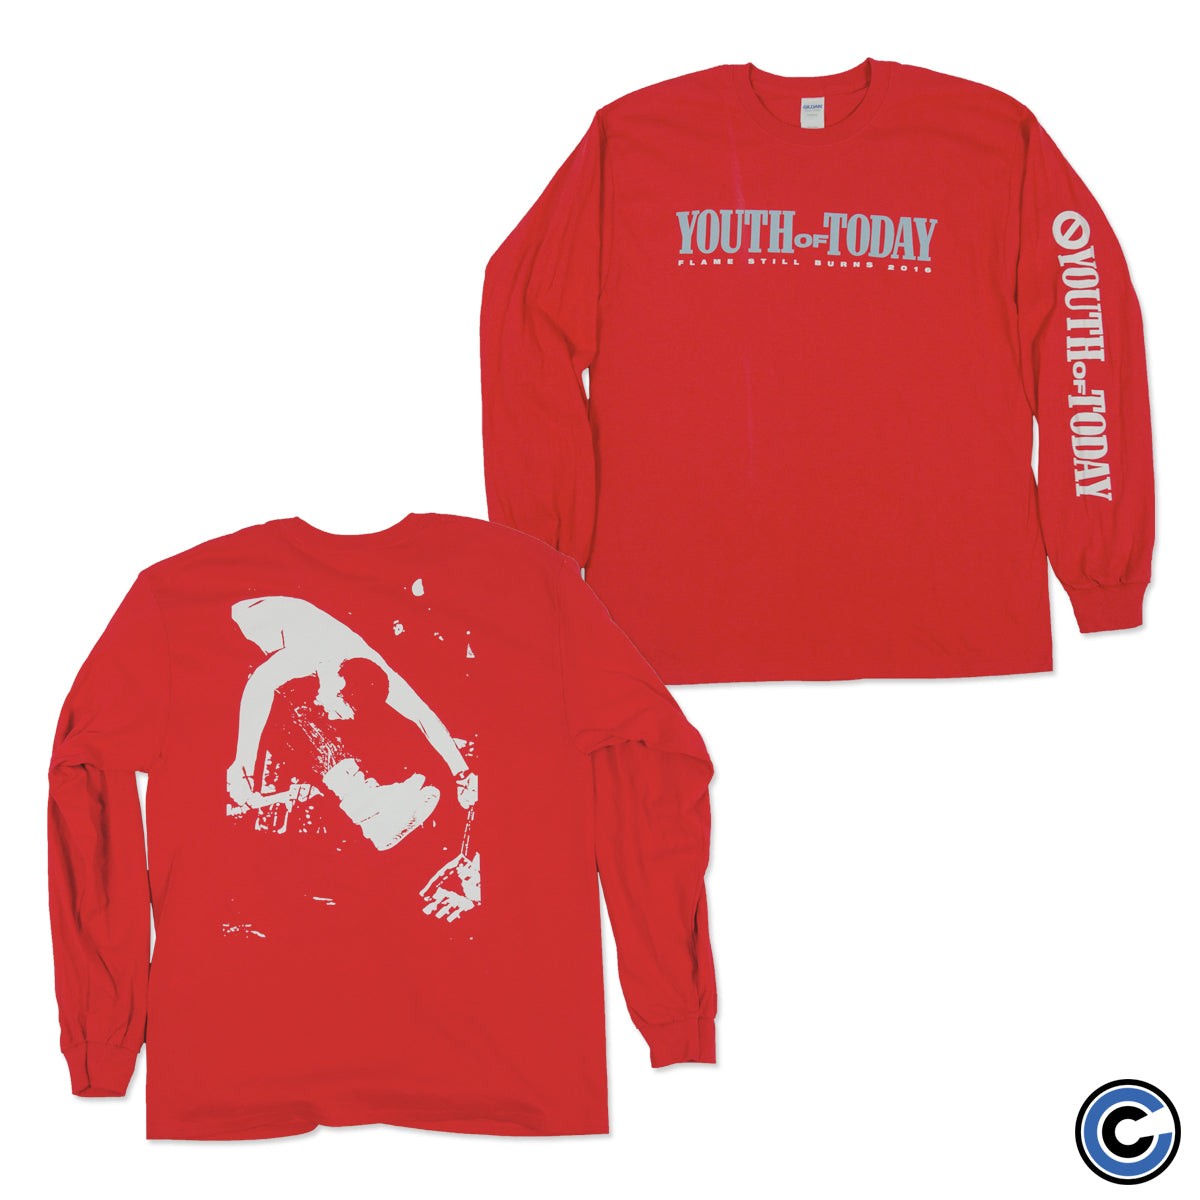 Youth of Today "Flame Still Burns" Long Sleeve